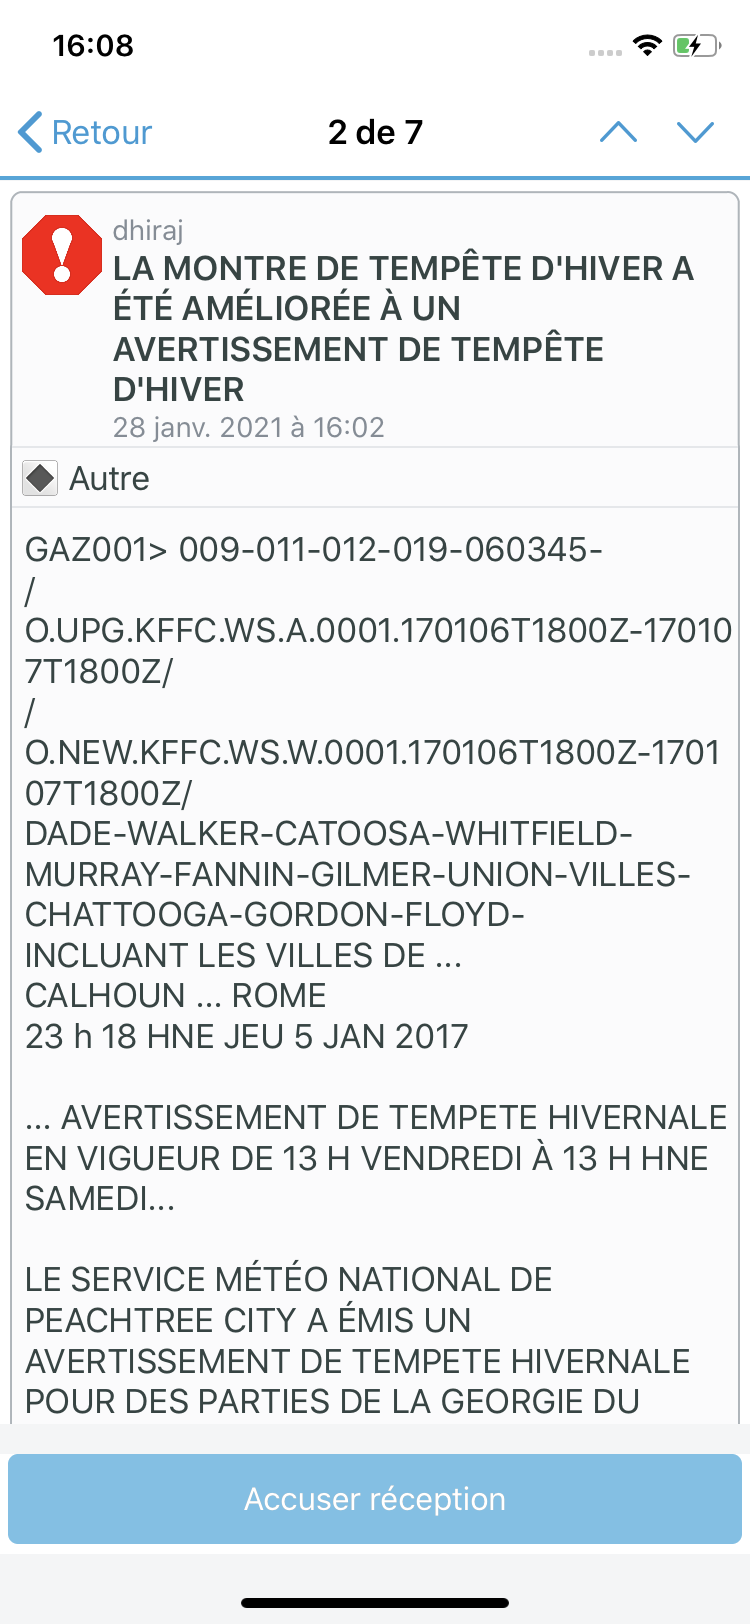 Mobile alert localized in French (Canada)